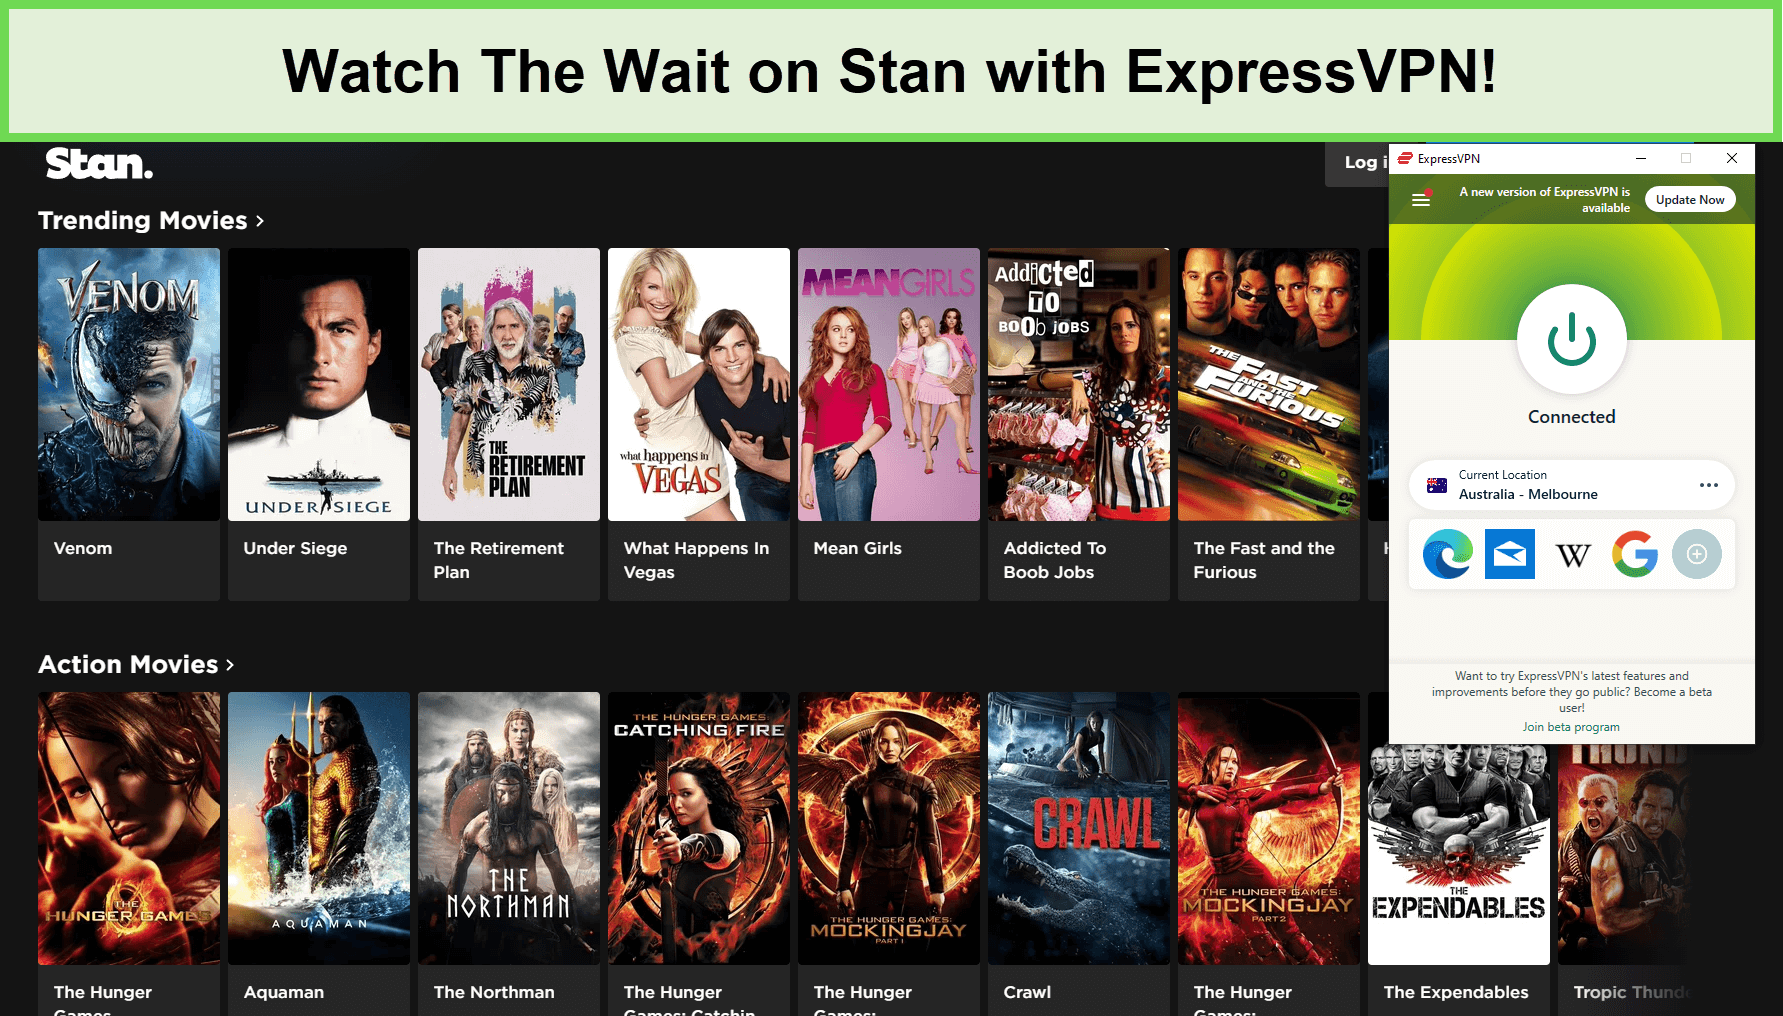 Watch-The-Wait-in-India-on-Stan-with-ExpressVPN